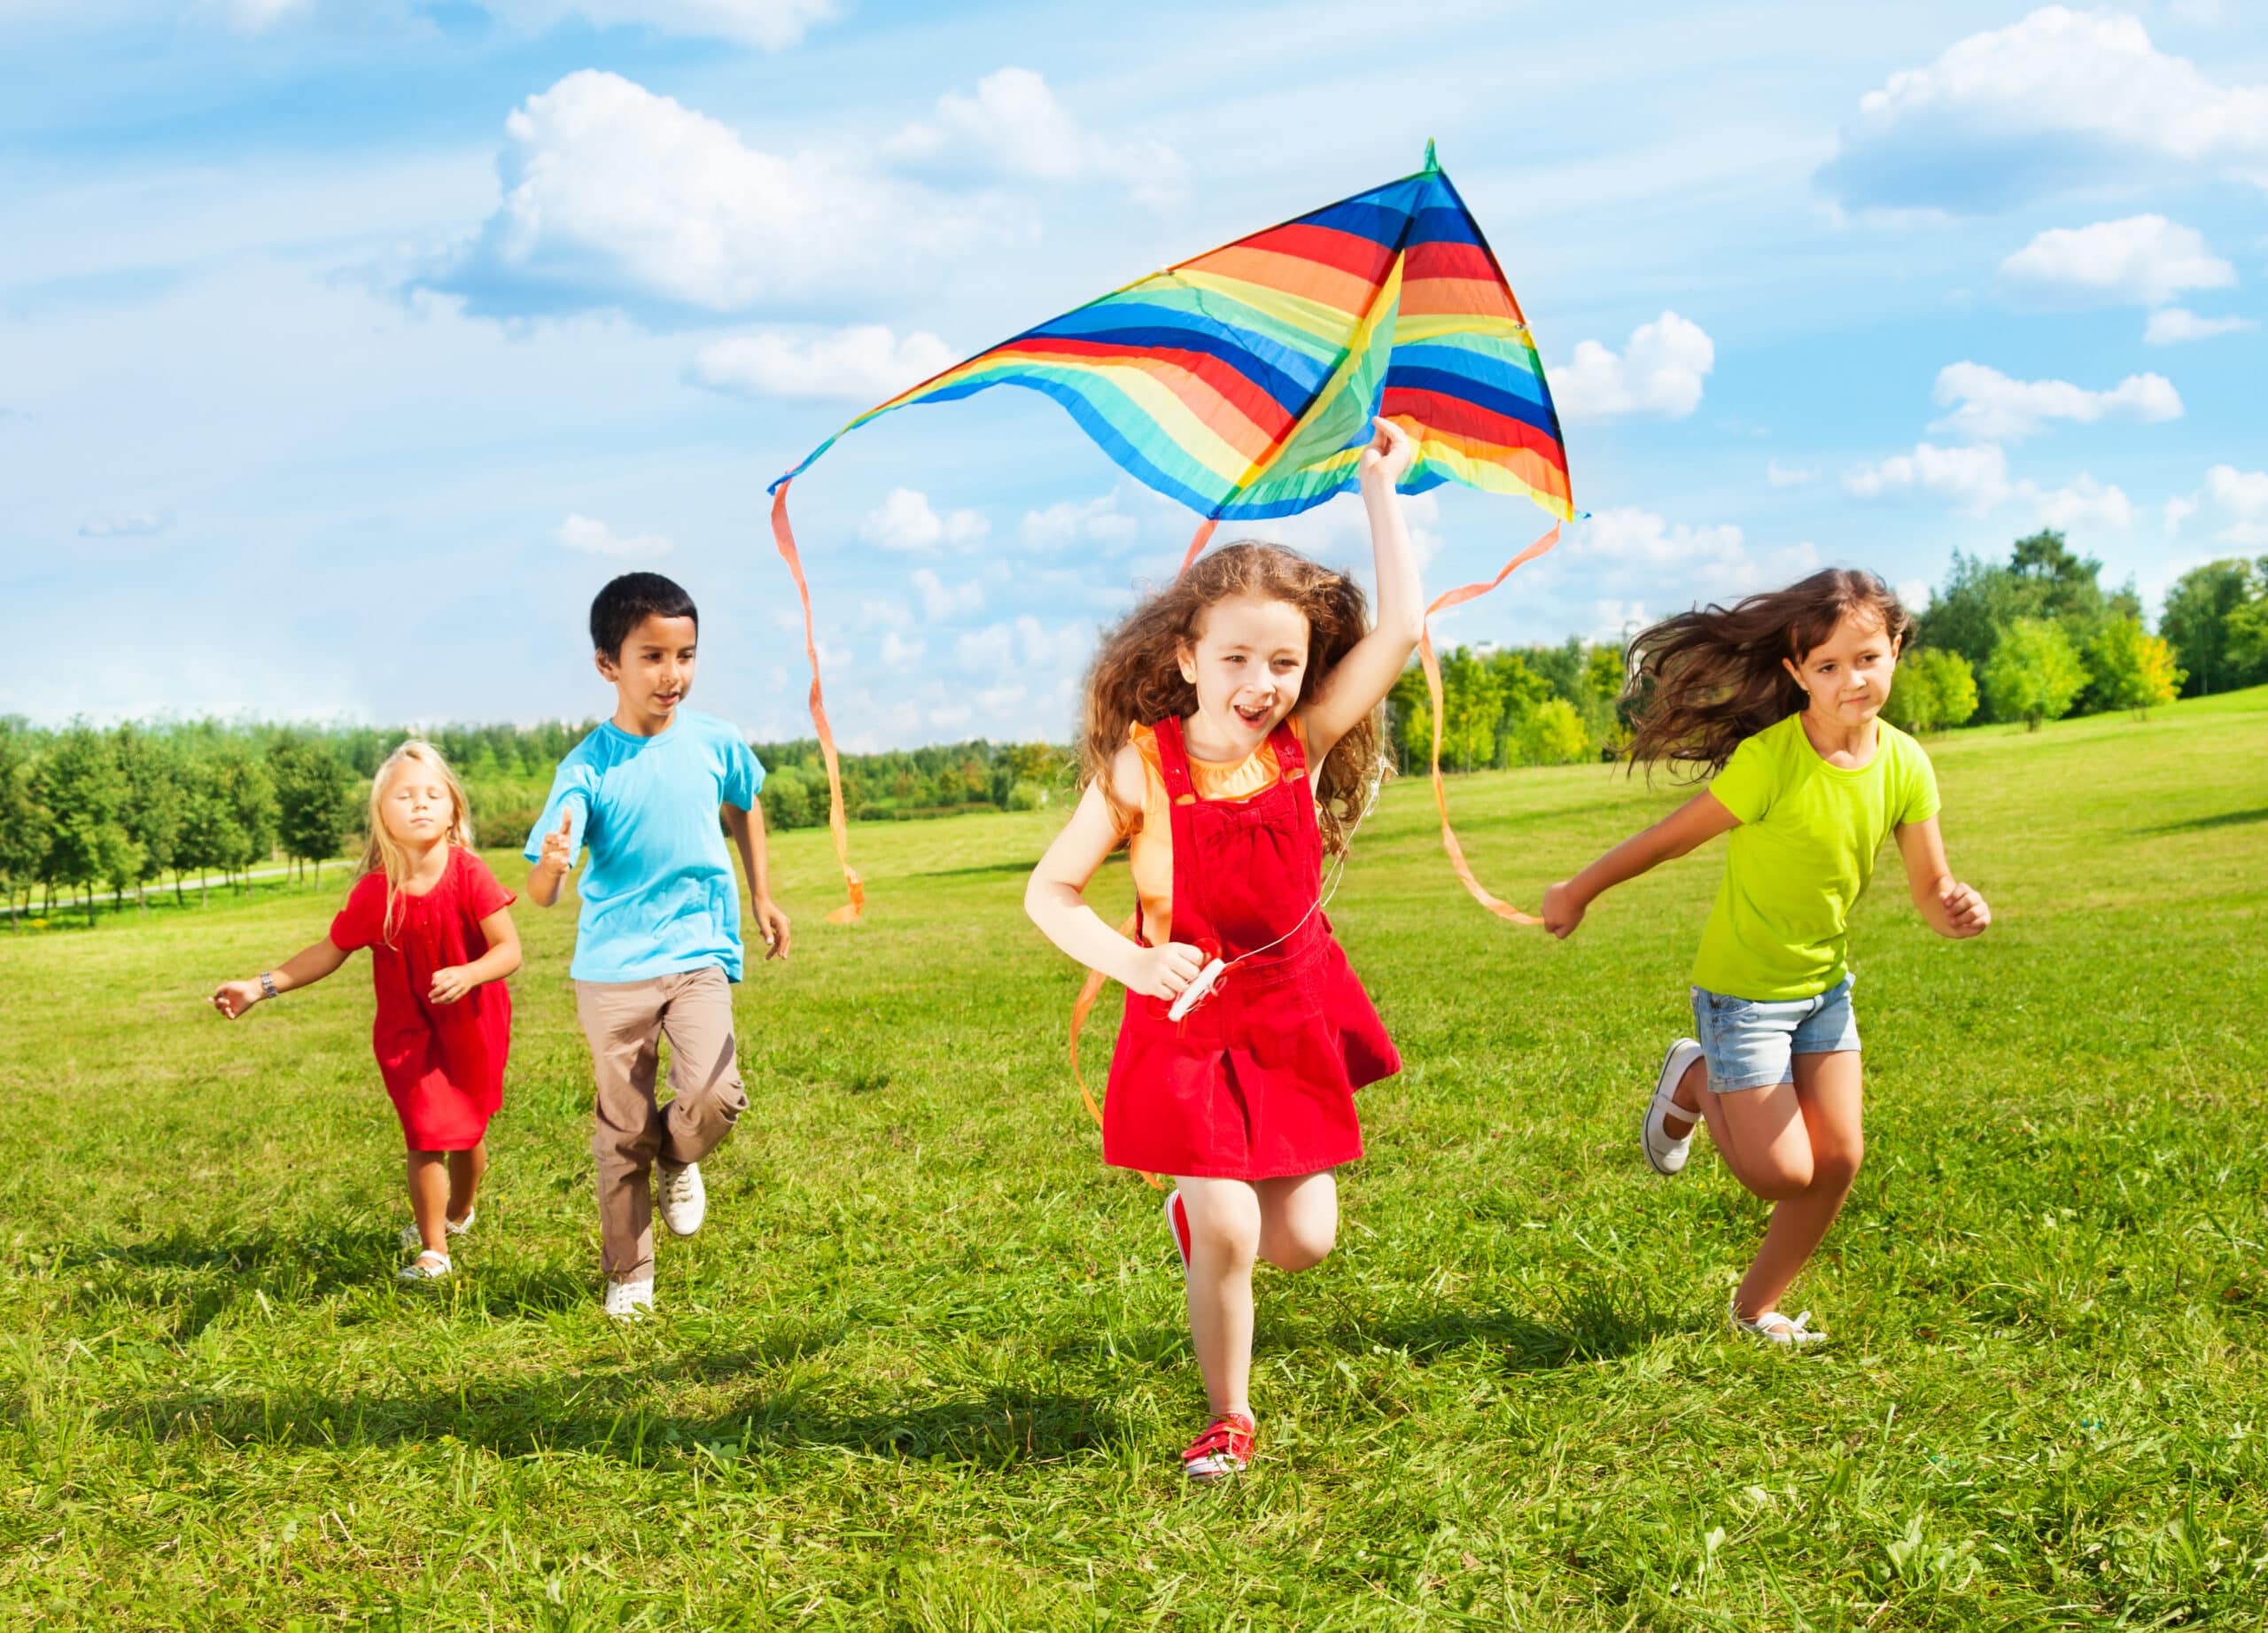 Group Of Four Kids Running In The Park With Kite